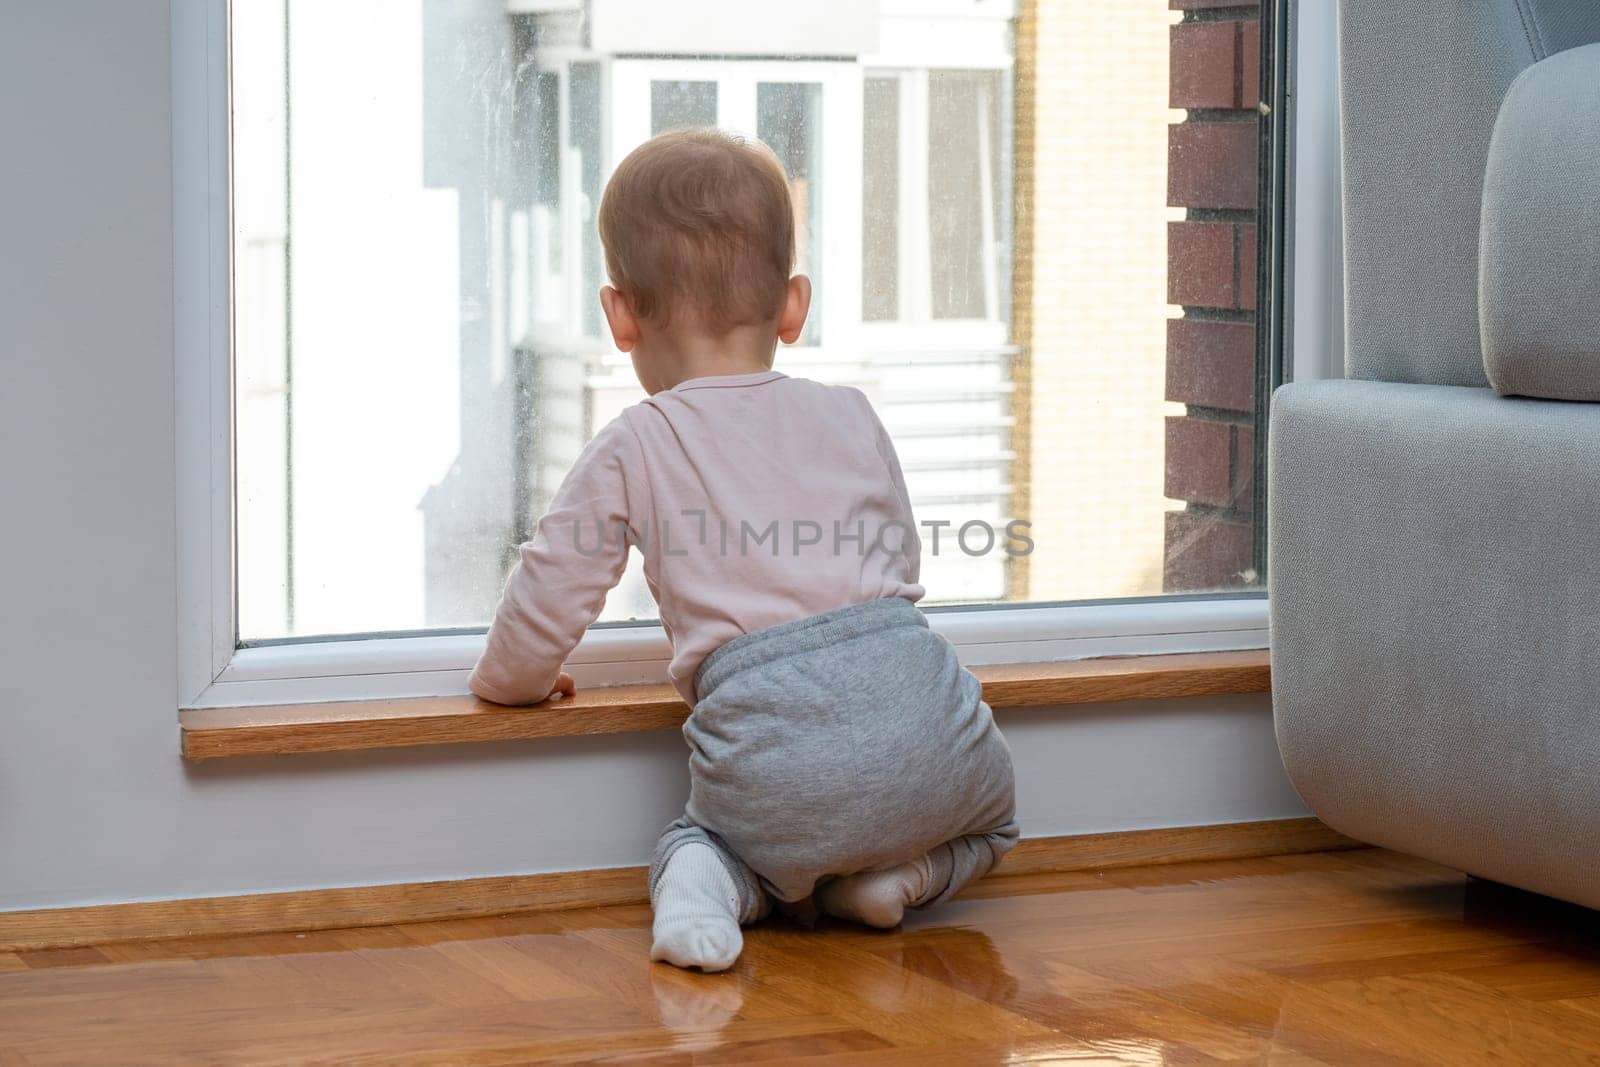 Child sees outside from window, wishes to go out. Concept of wanting to explore by Mariakray